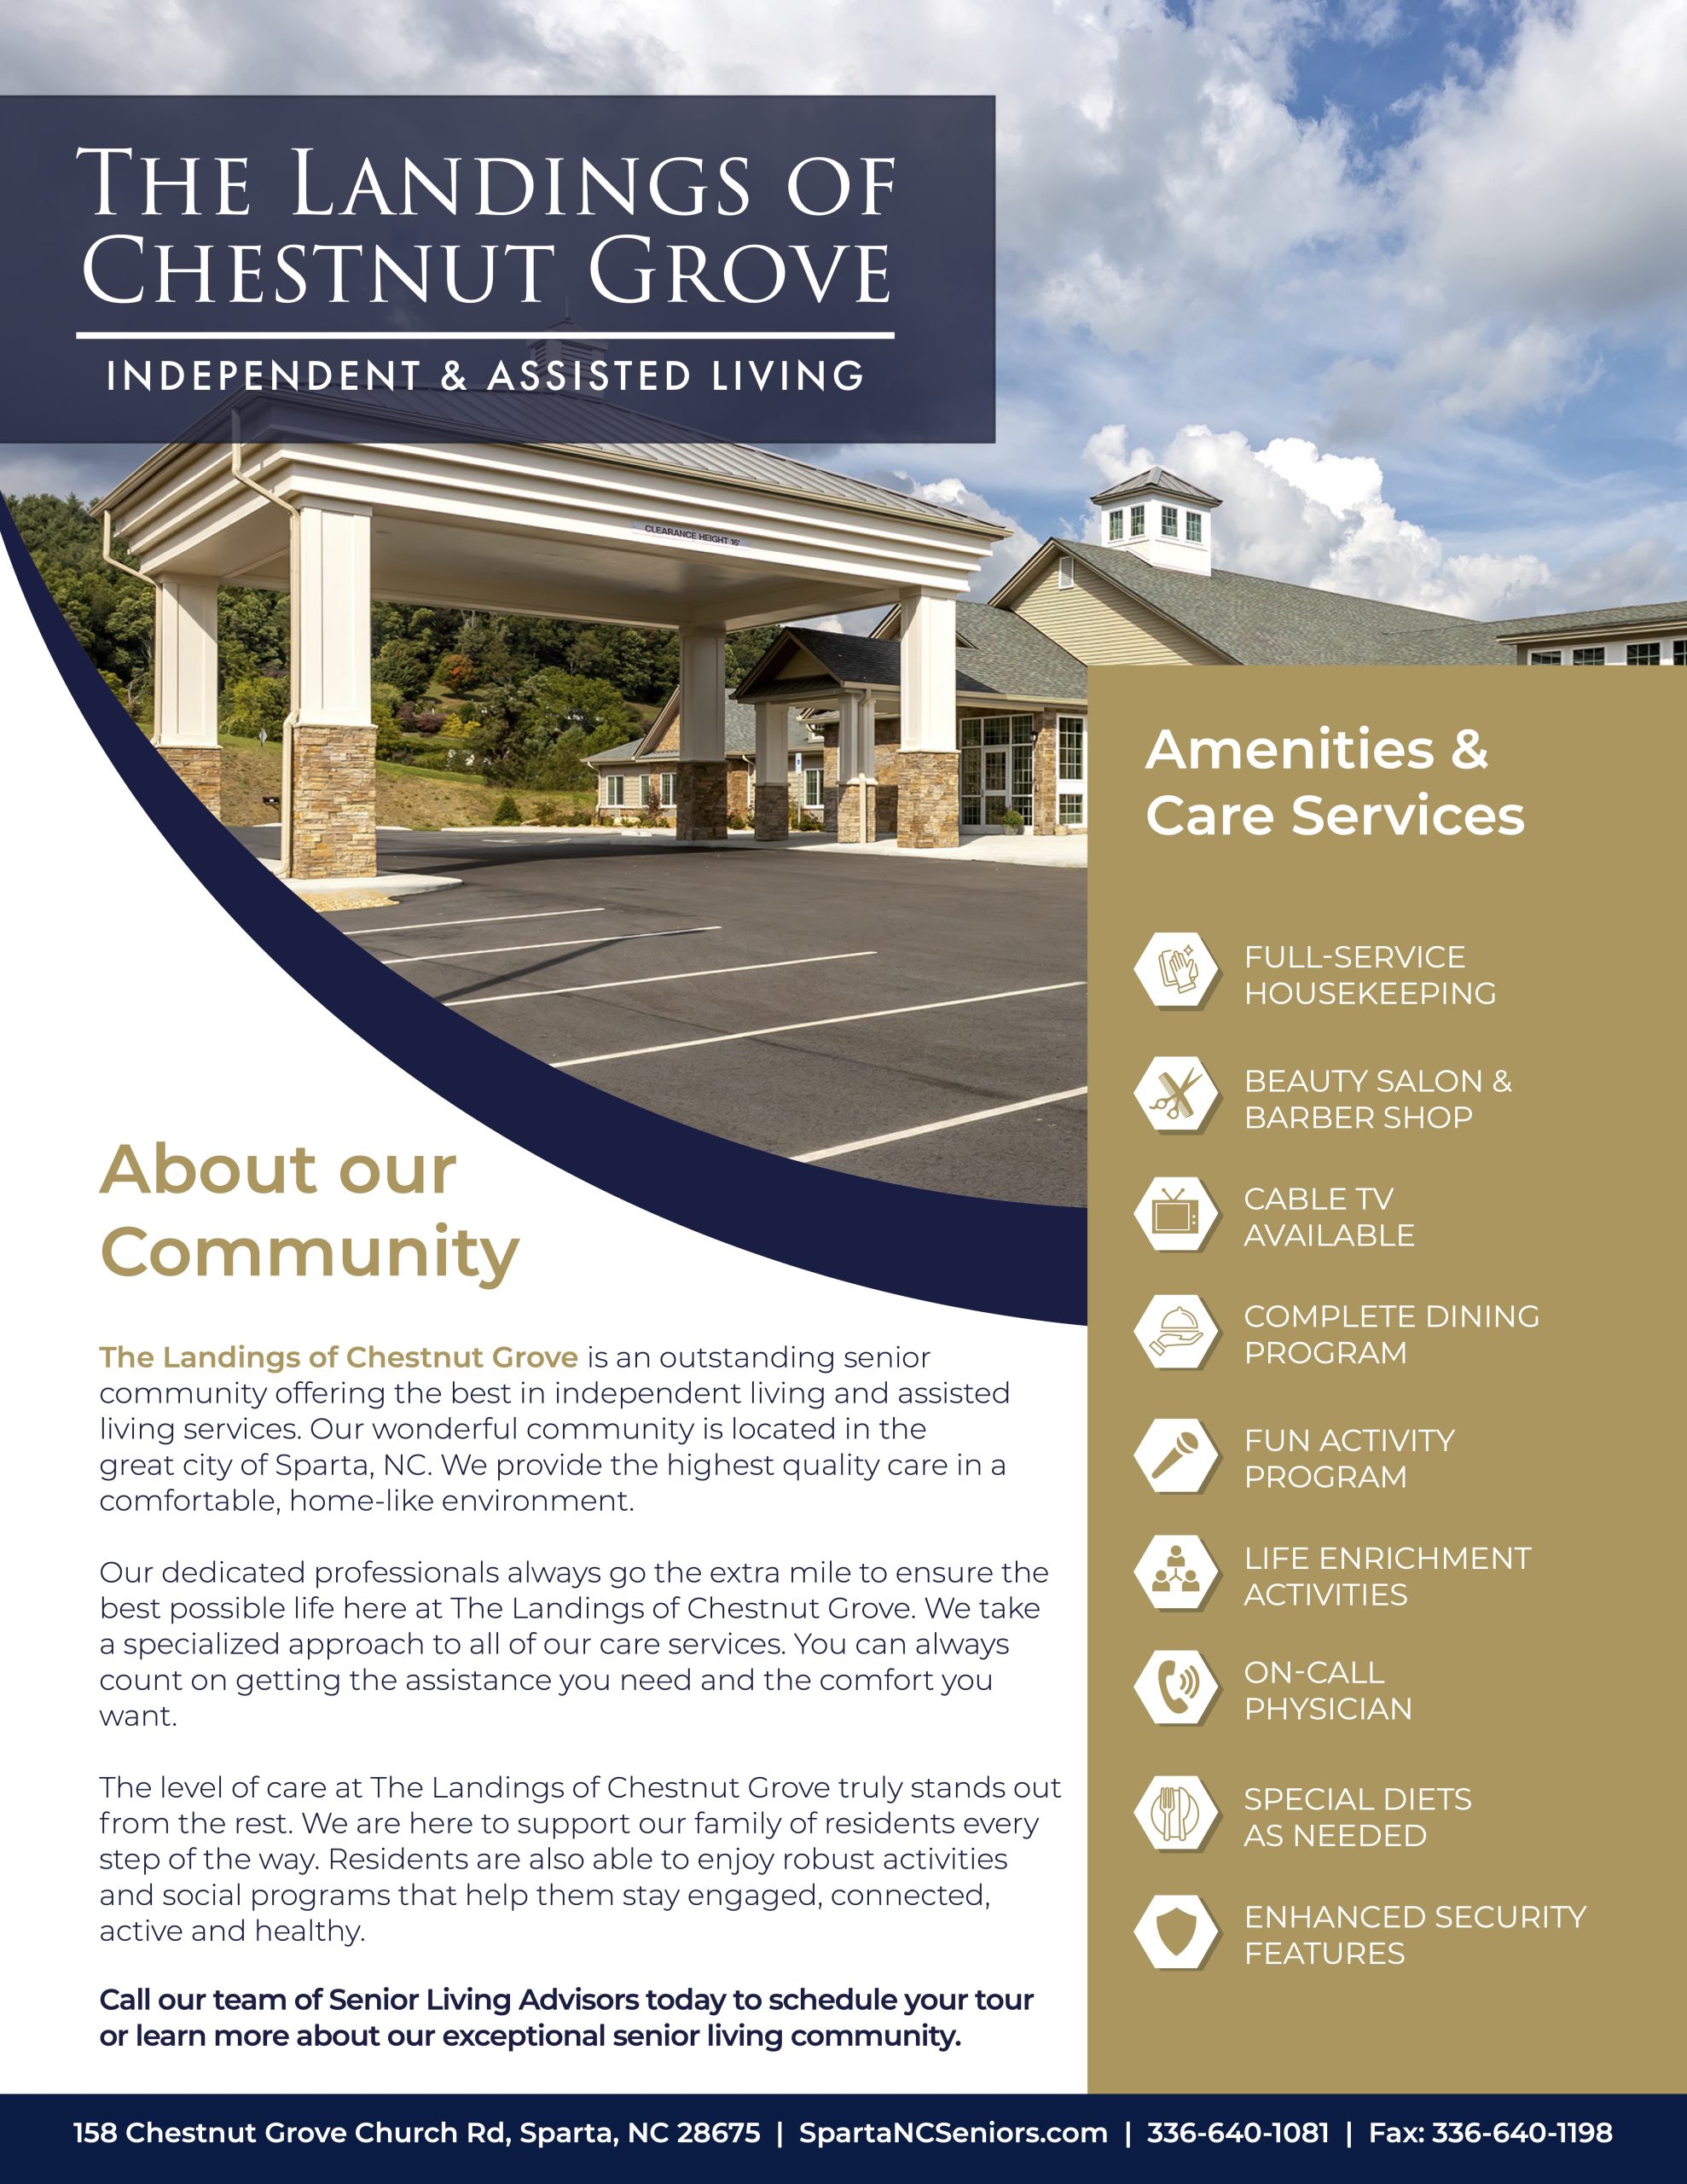 TLO Chestnut Grove - About our Services